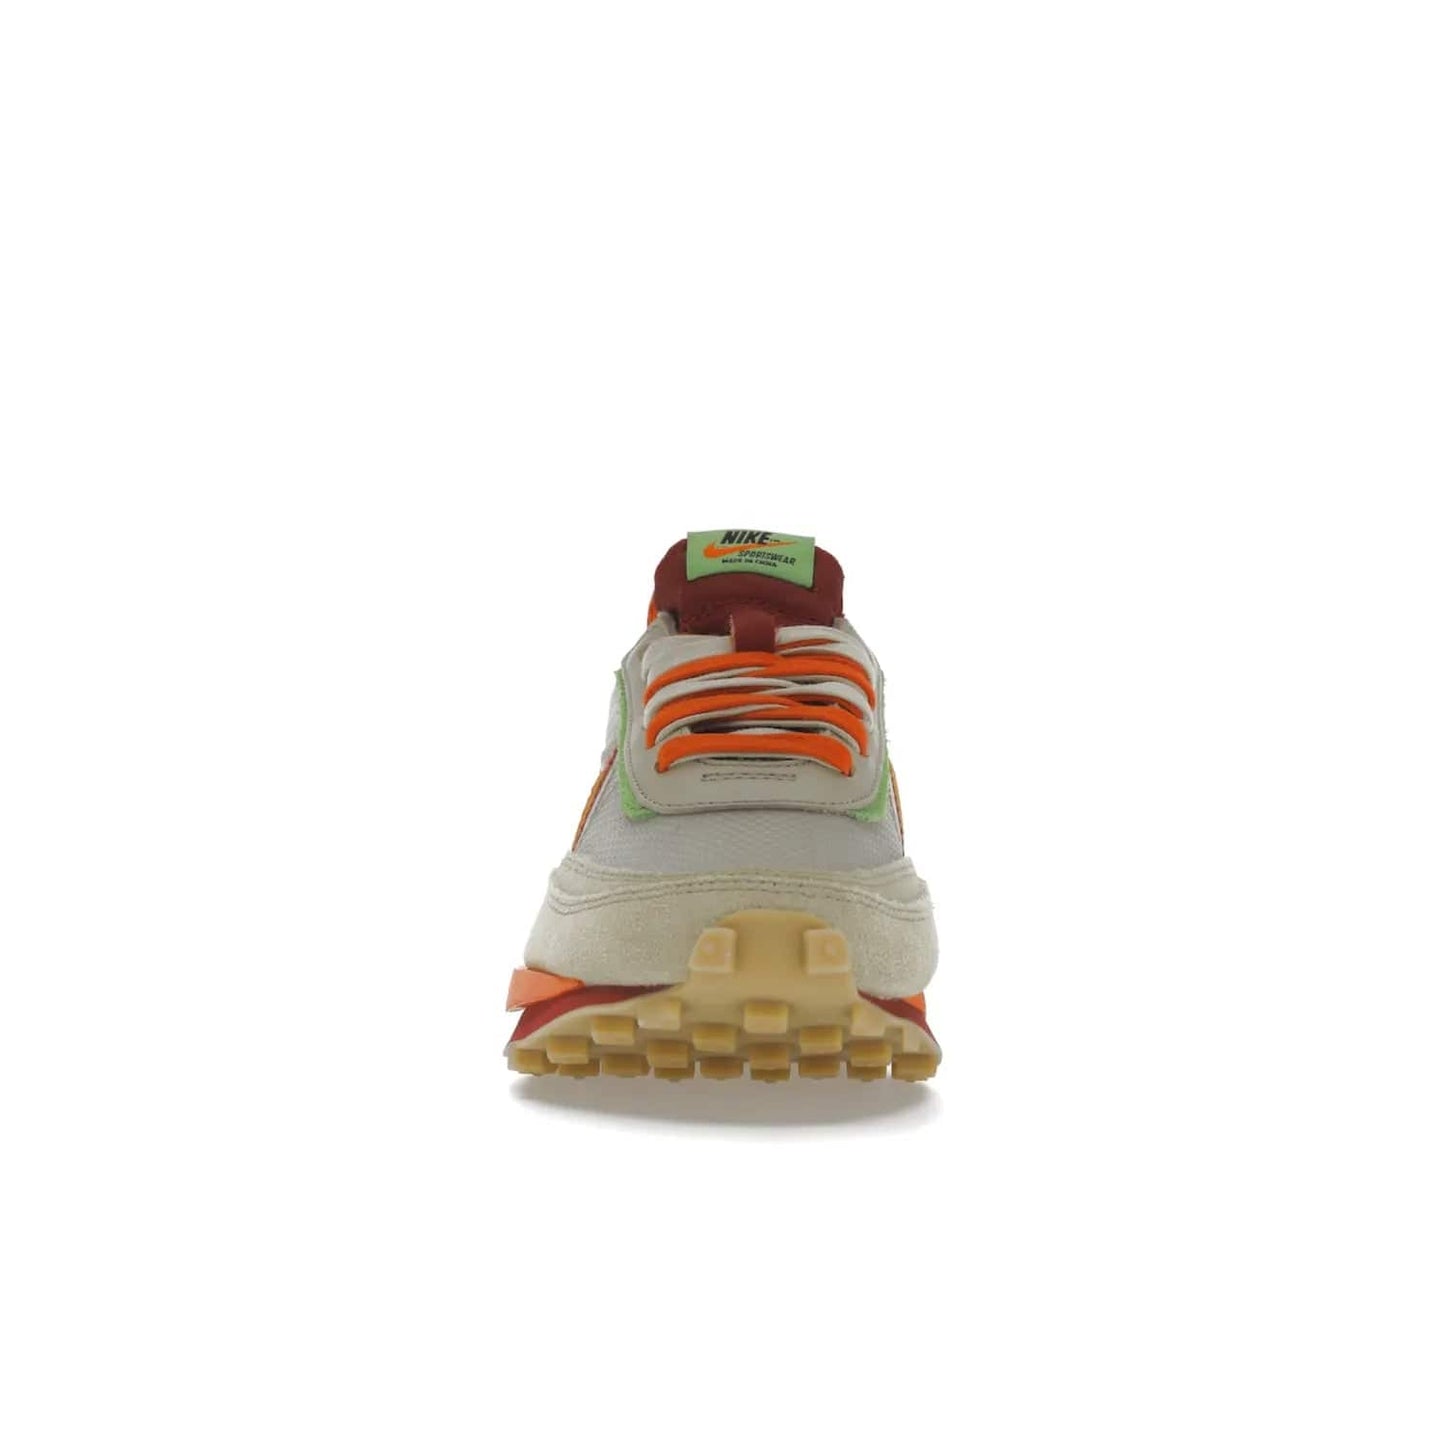 Nike LD Waffle sacai CLOT Kiss of Death Net Orange Blaze - Image 10 - Only at www.BallersClubKickz.com - A bold and stylish Nike LD Waffle sacai CLOT Kiss of Death Net Orange Blaze sneaker featuring a unique off-white, Deep Red & Orange Blaze Swooshes, two-toned stacked sole and doubled tongue. Available in September 2021. Make a statement.